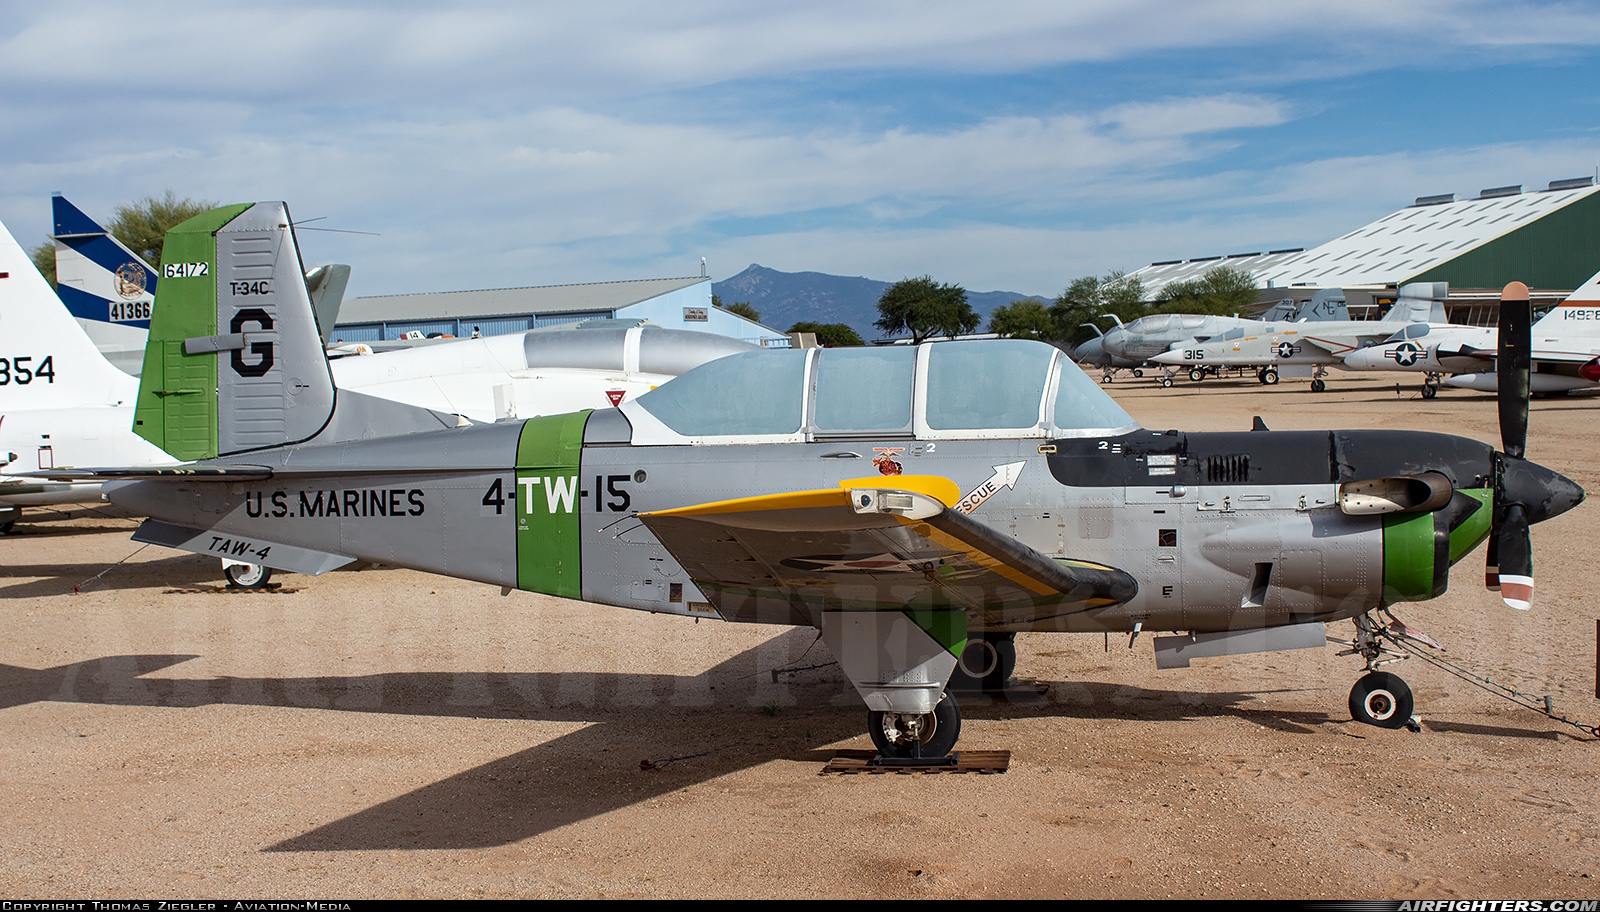 USA - Navy Beech T-34C Turbo Mentor (45) 164172 at Tucson - Pima Air and Space Museum, USA